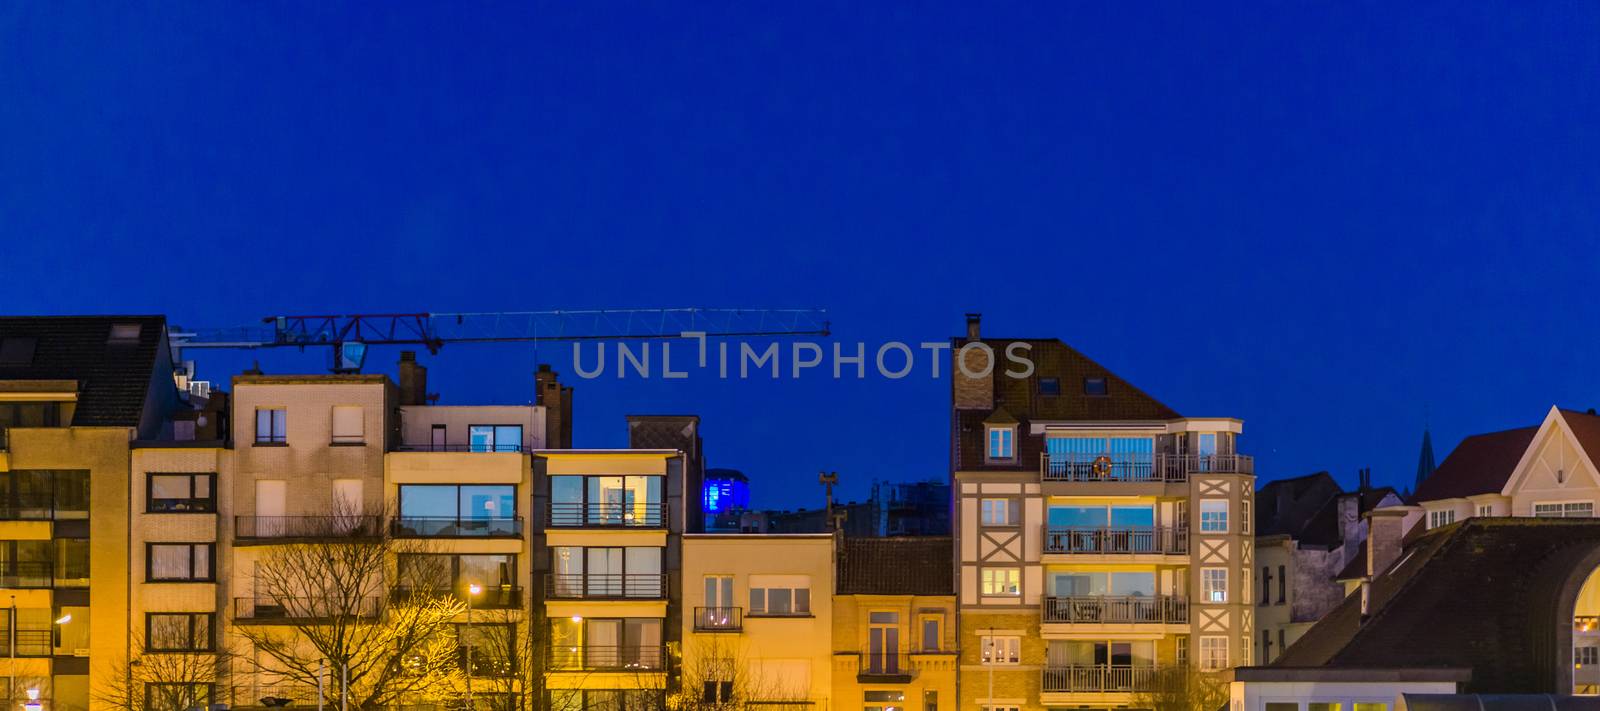 city apartments by night, Belgian architecture of Blankenberge, Belgium